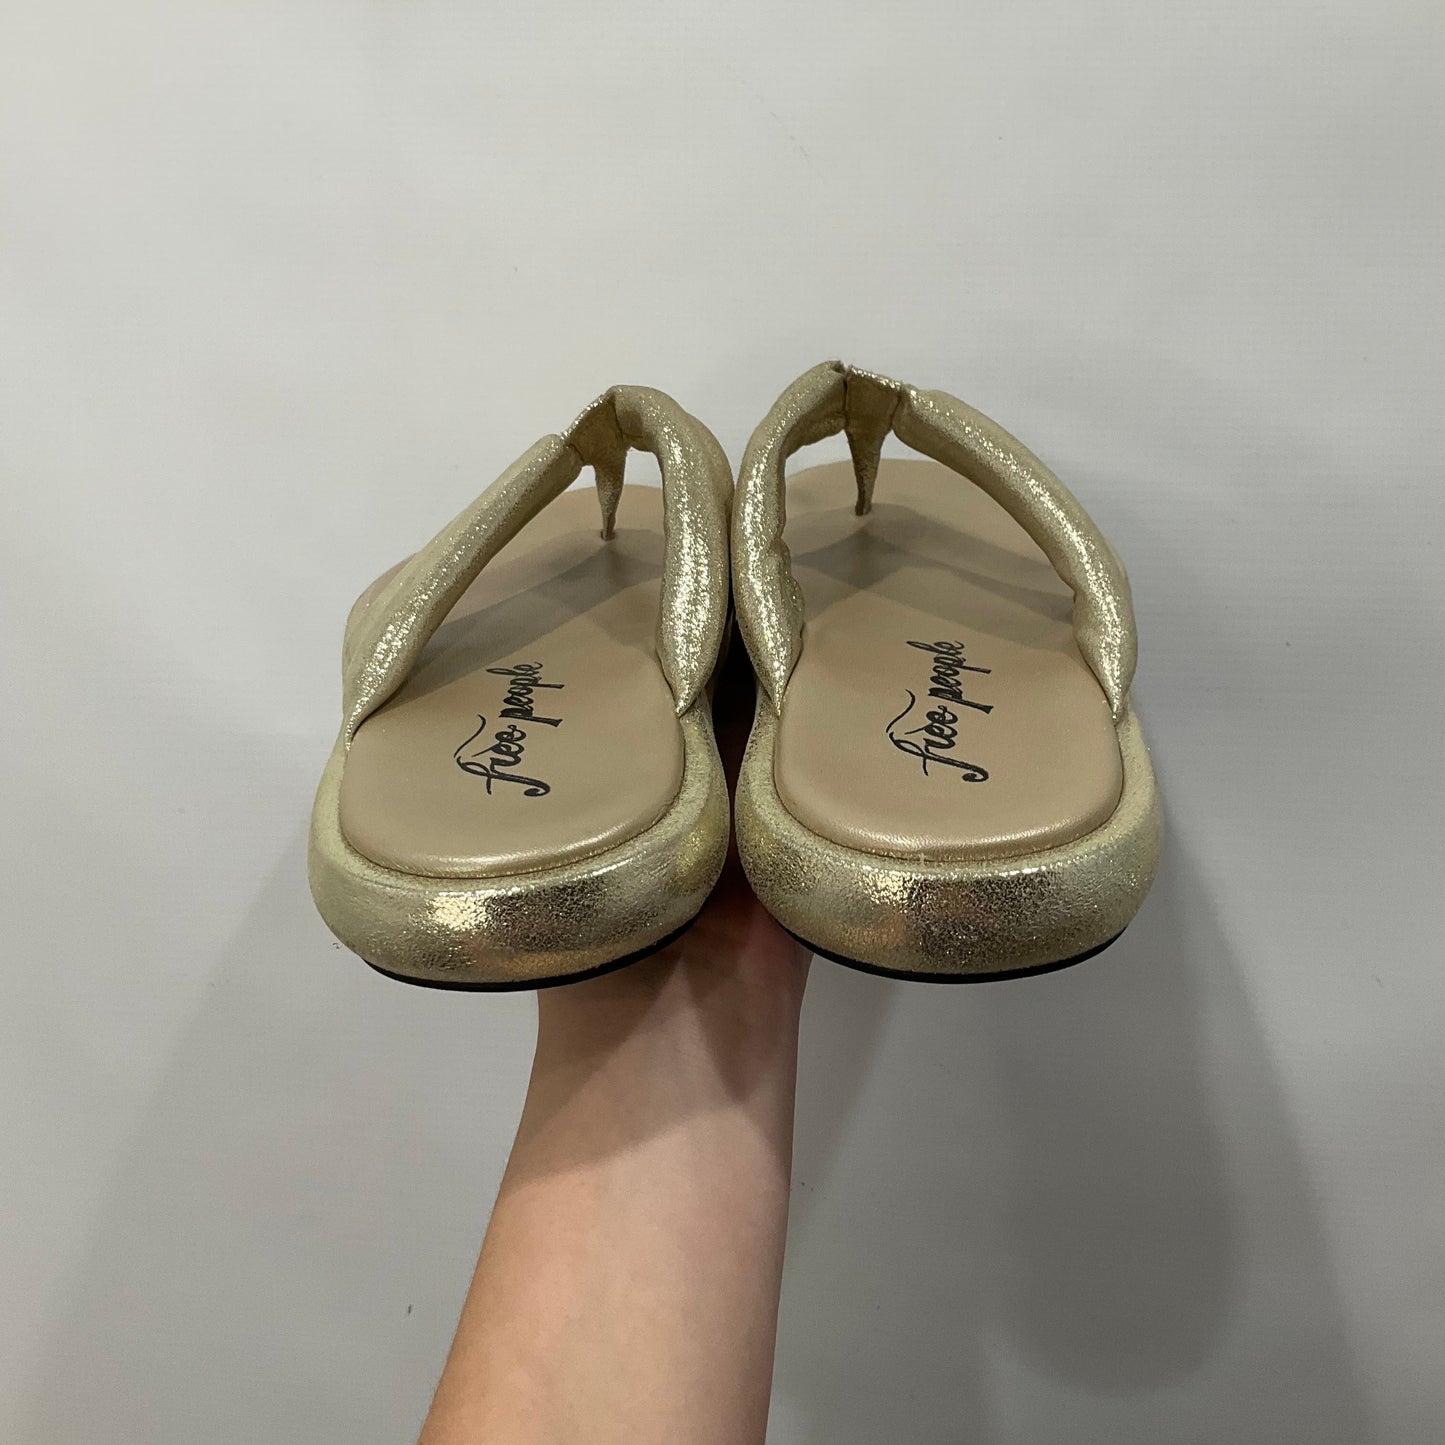 Gold Sandals Flats Free People, Size 8.5